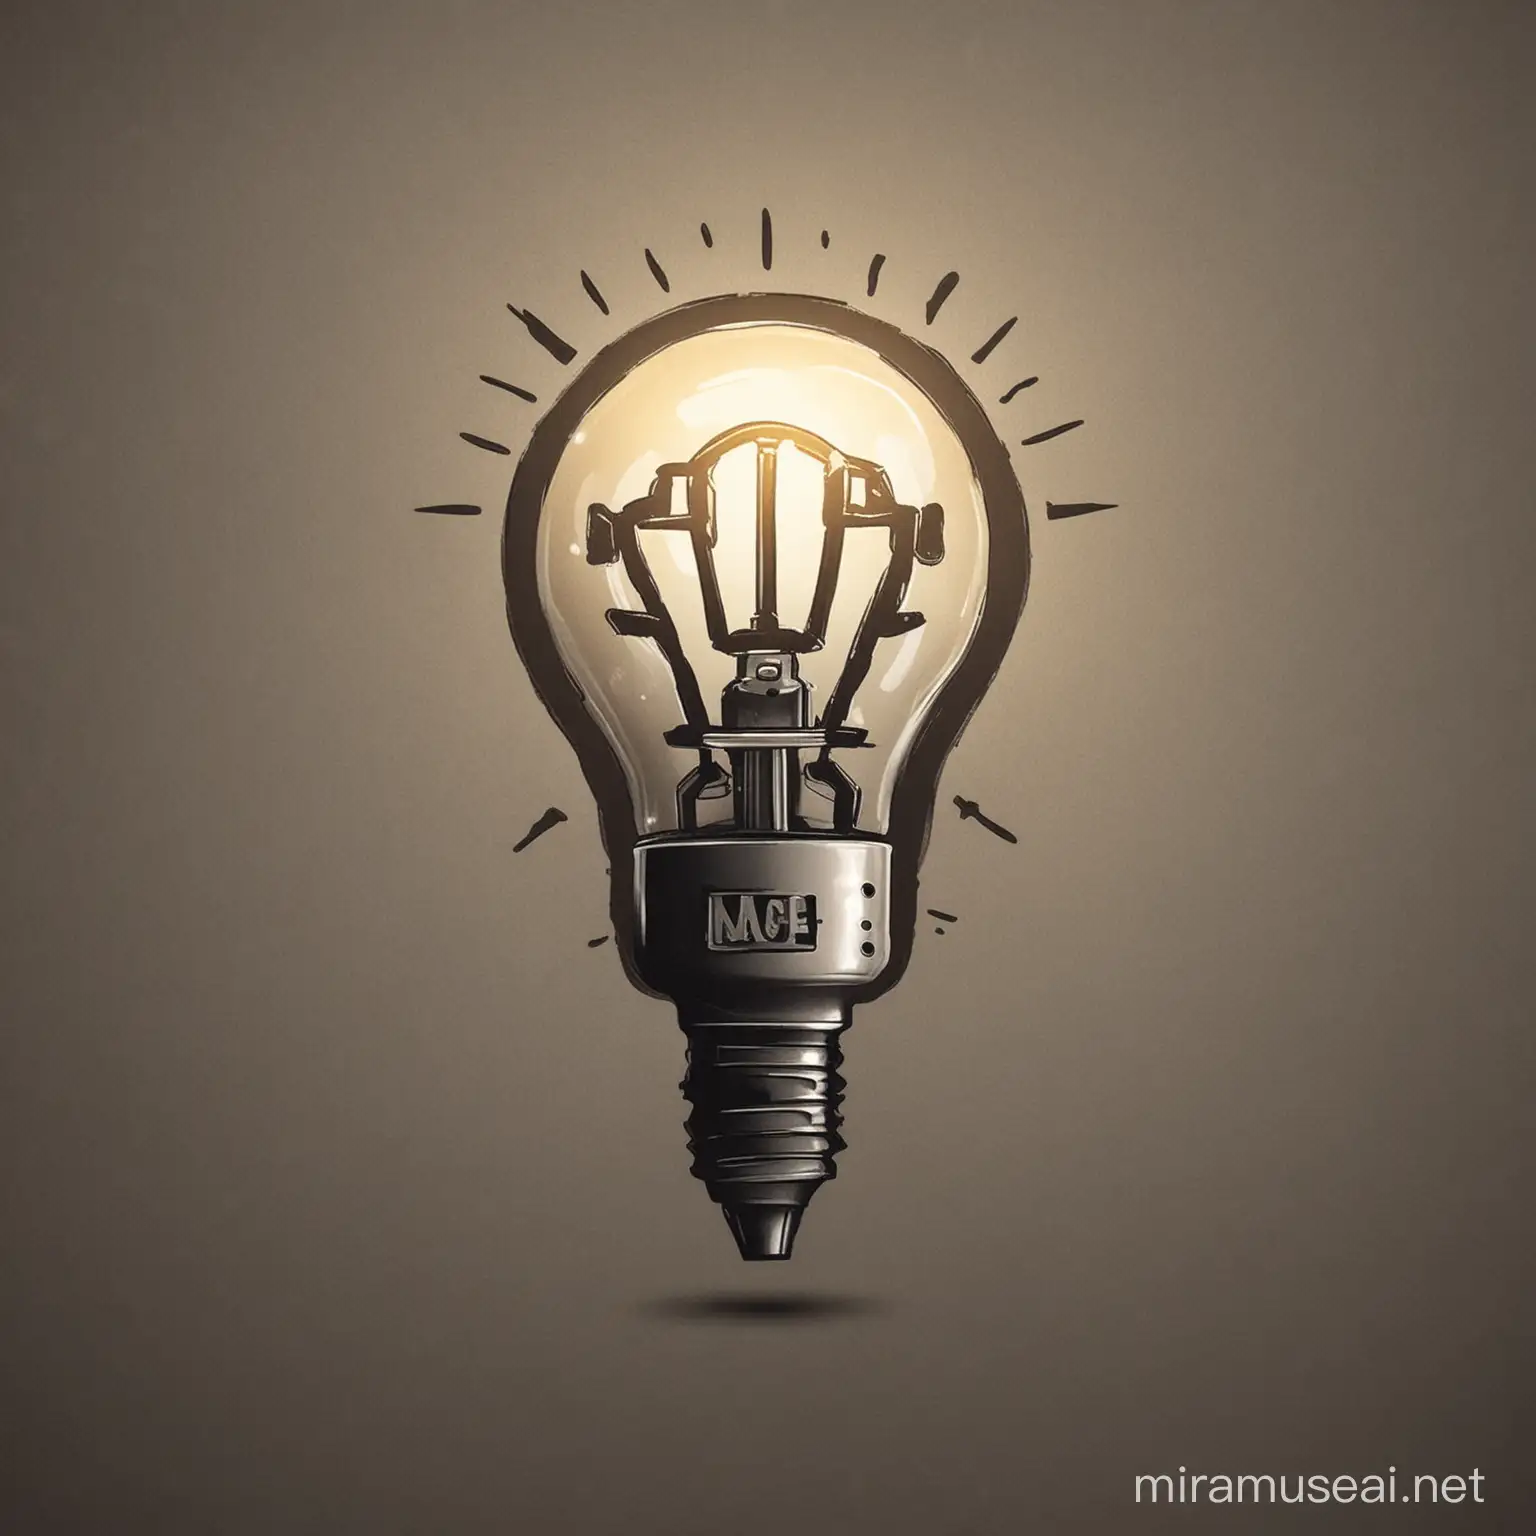 make logo that is a microphone that looks like a light bulb